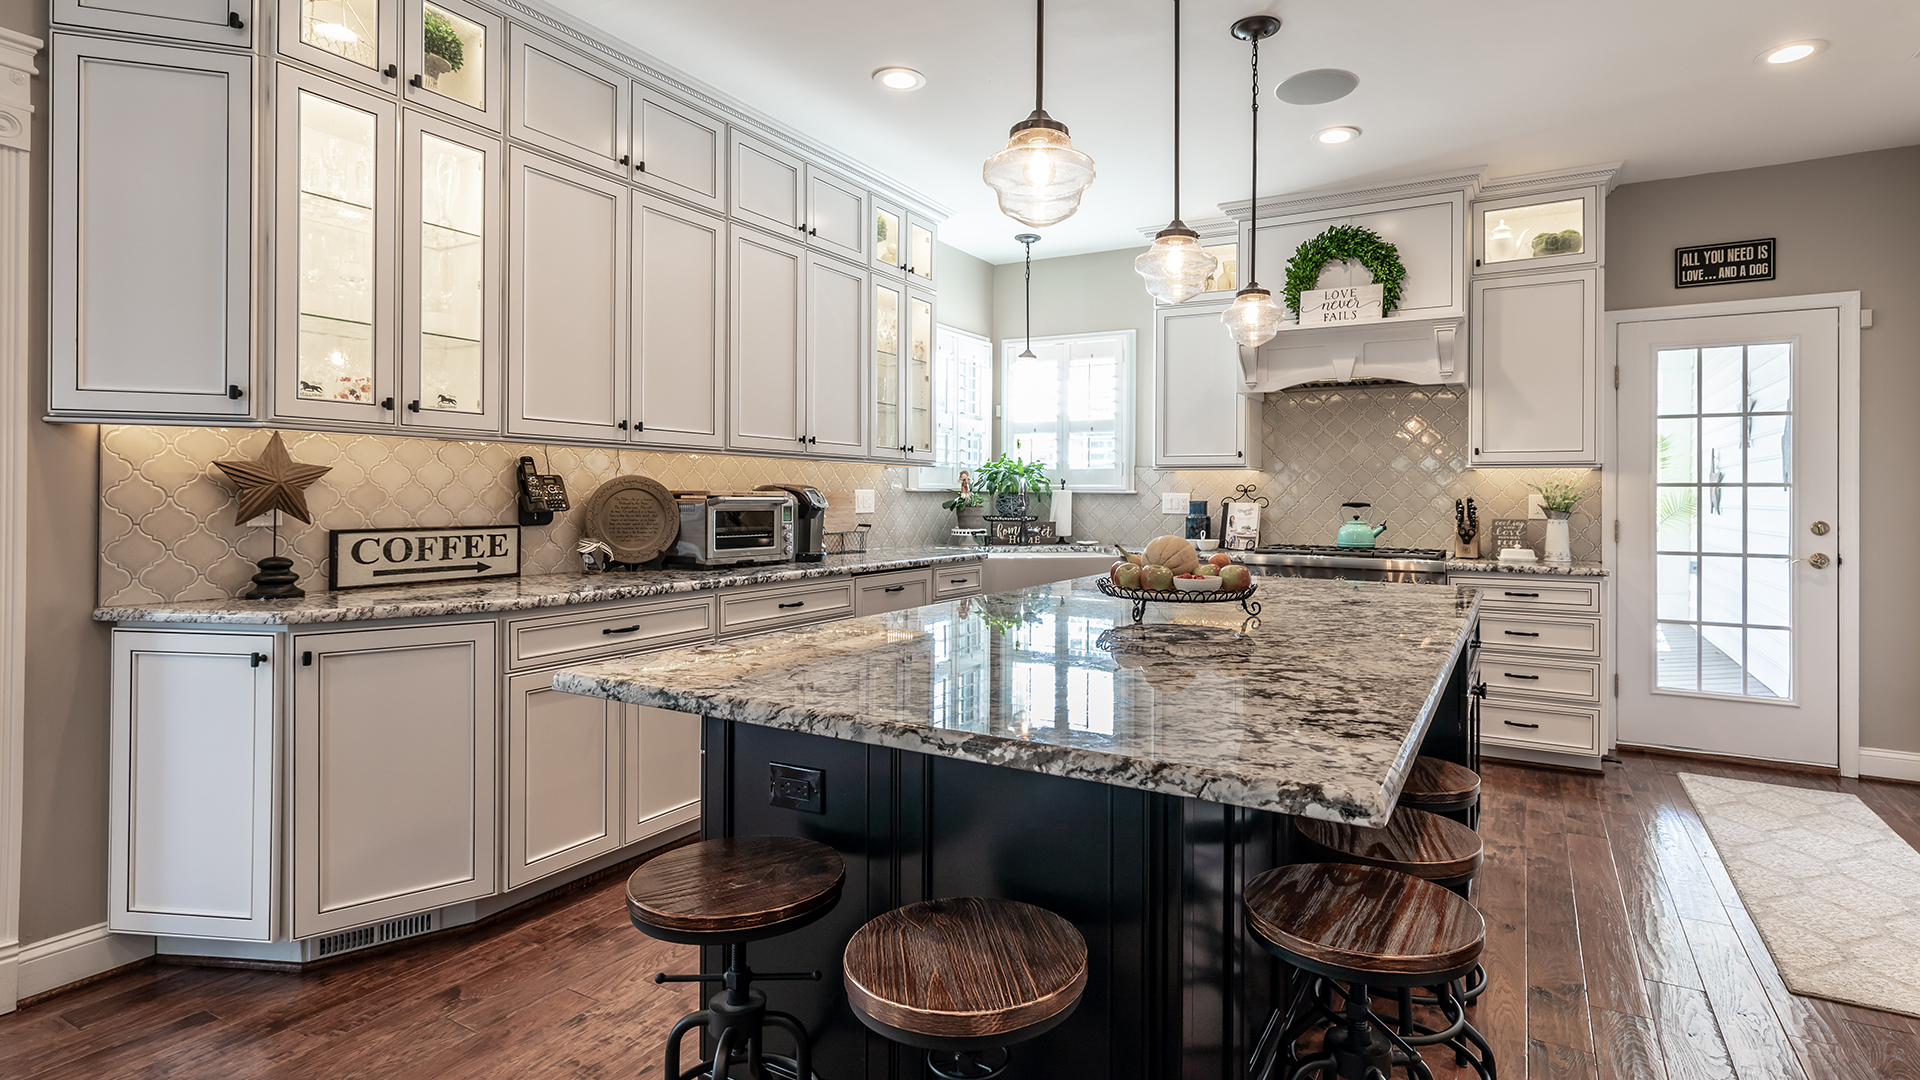 Top 6 Kitchen Design Trends For 2023 To Inspire Your Dream Kitchen